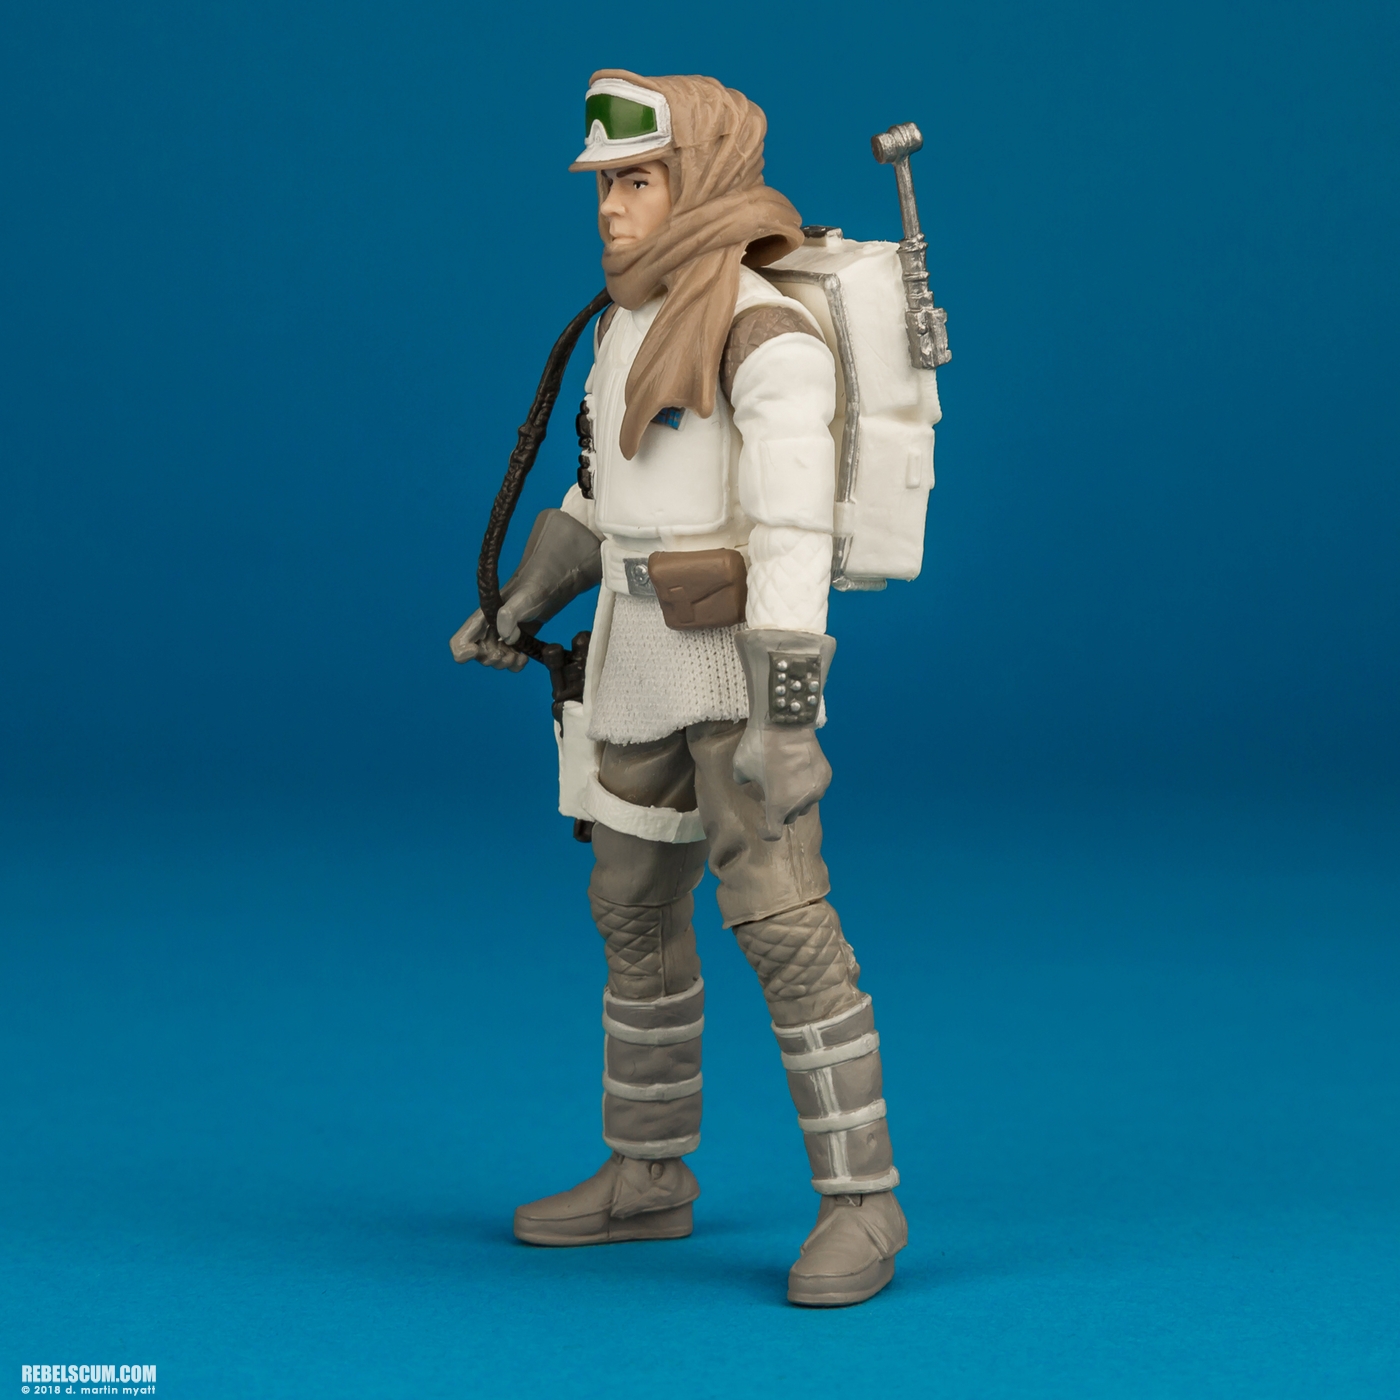 VC120-Rebel-Soldier-Hoth-The-Vintage-Collection-Hasbro-007.jpg